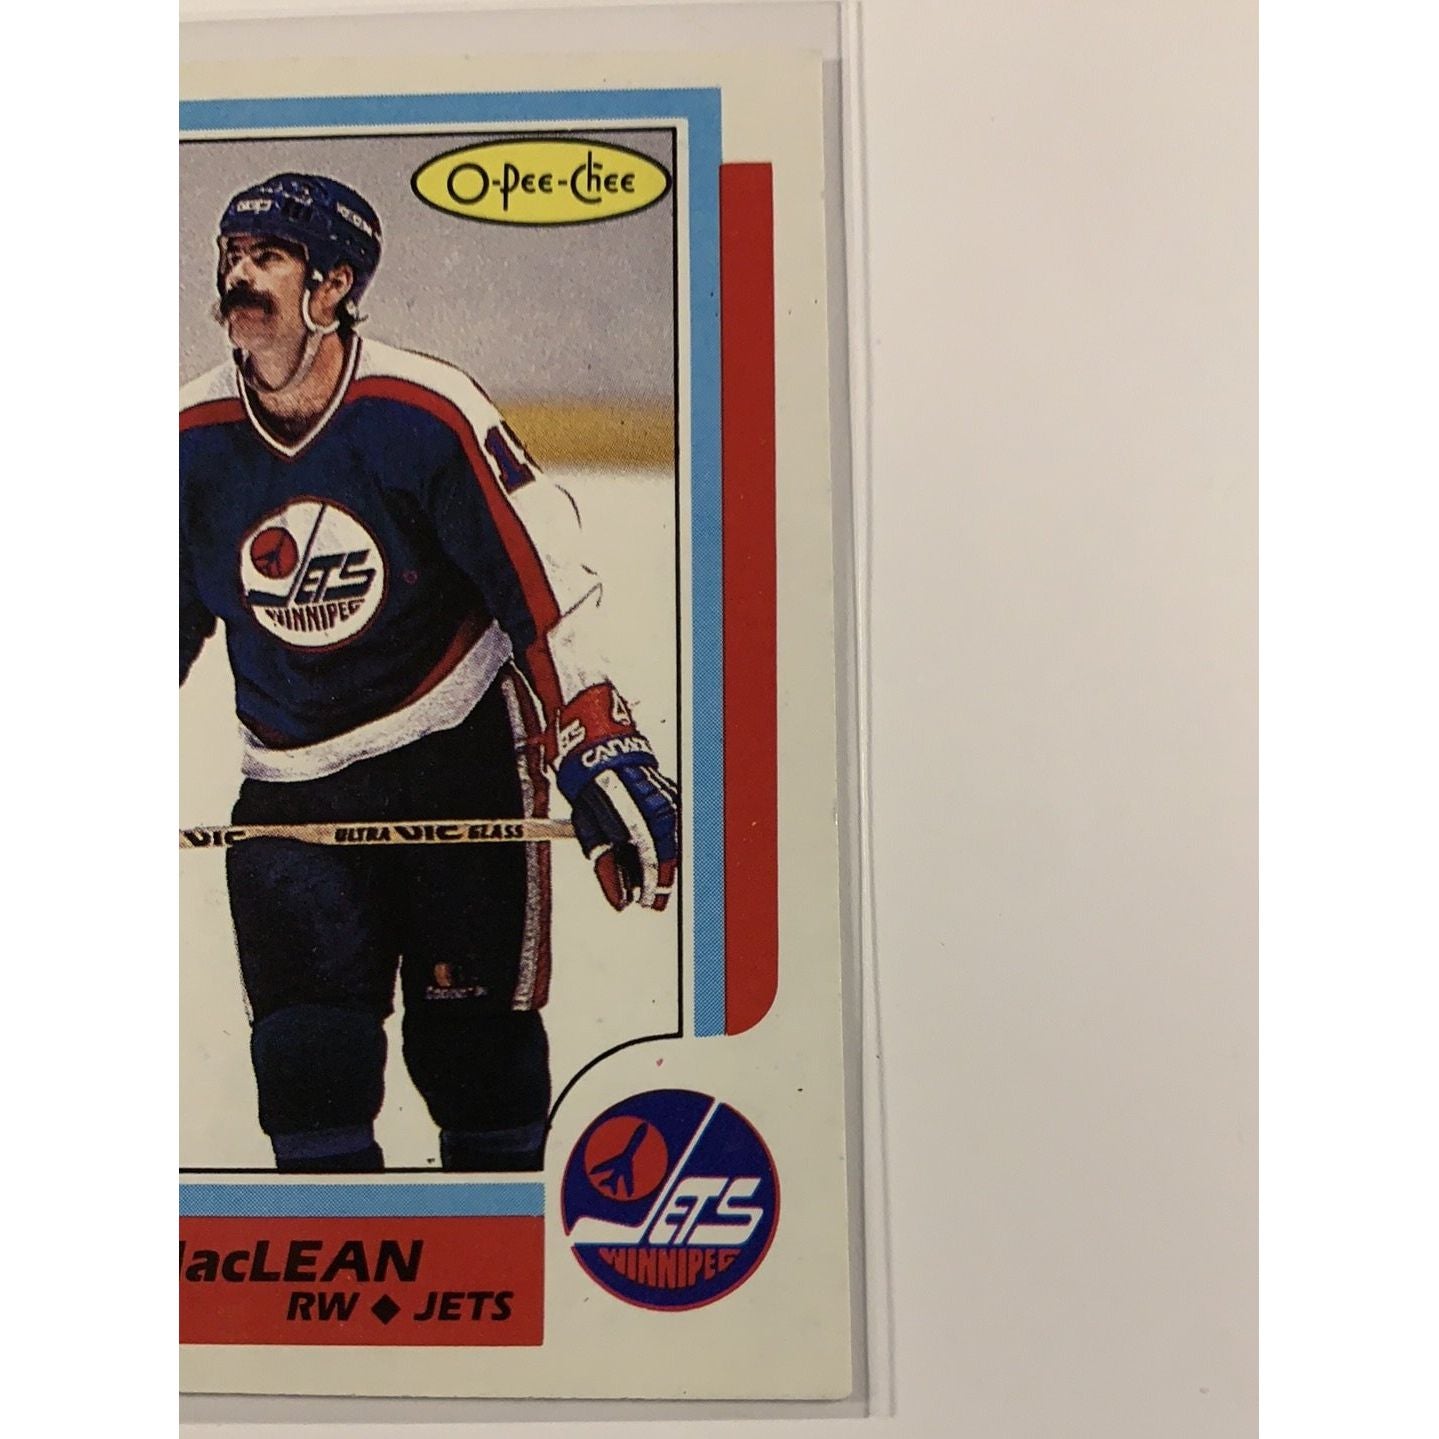  1986-87 O-Pee-Chee Paul Maclean base #114  Local Legends Cards & Collectibles